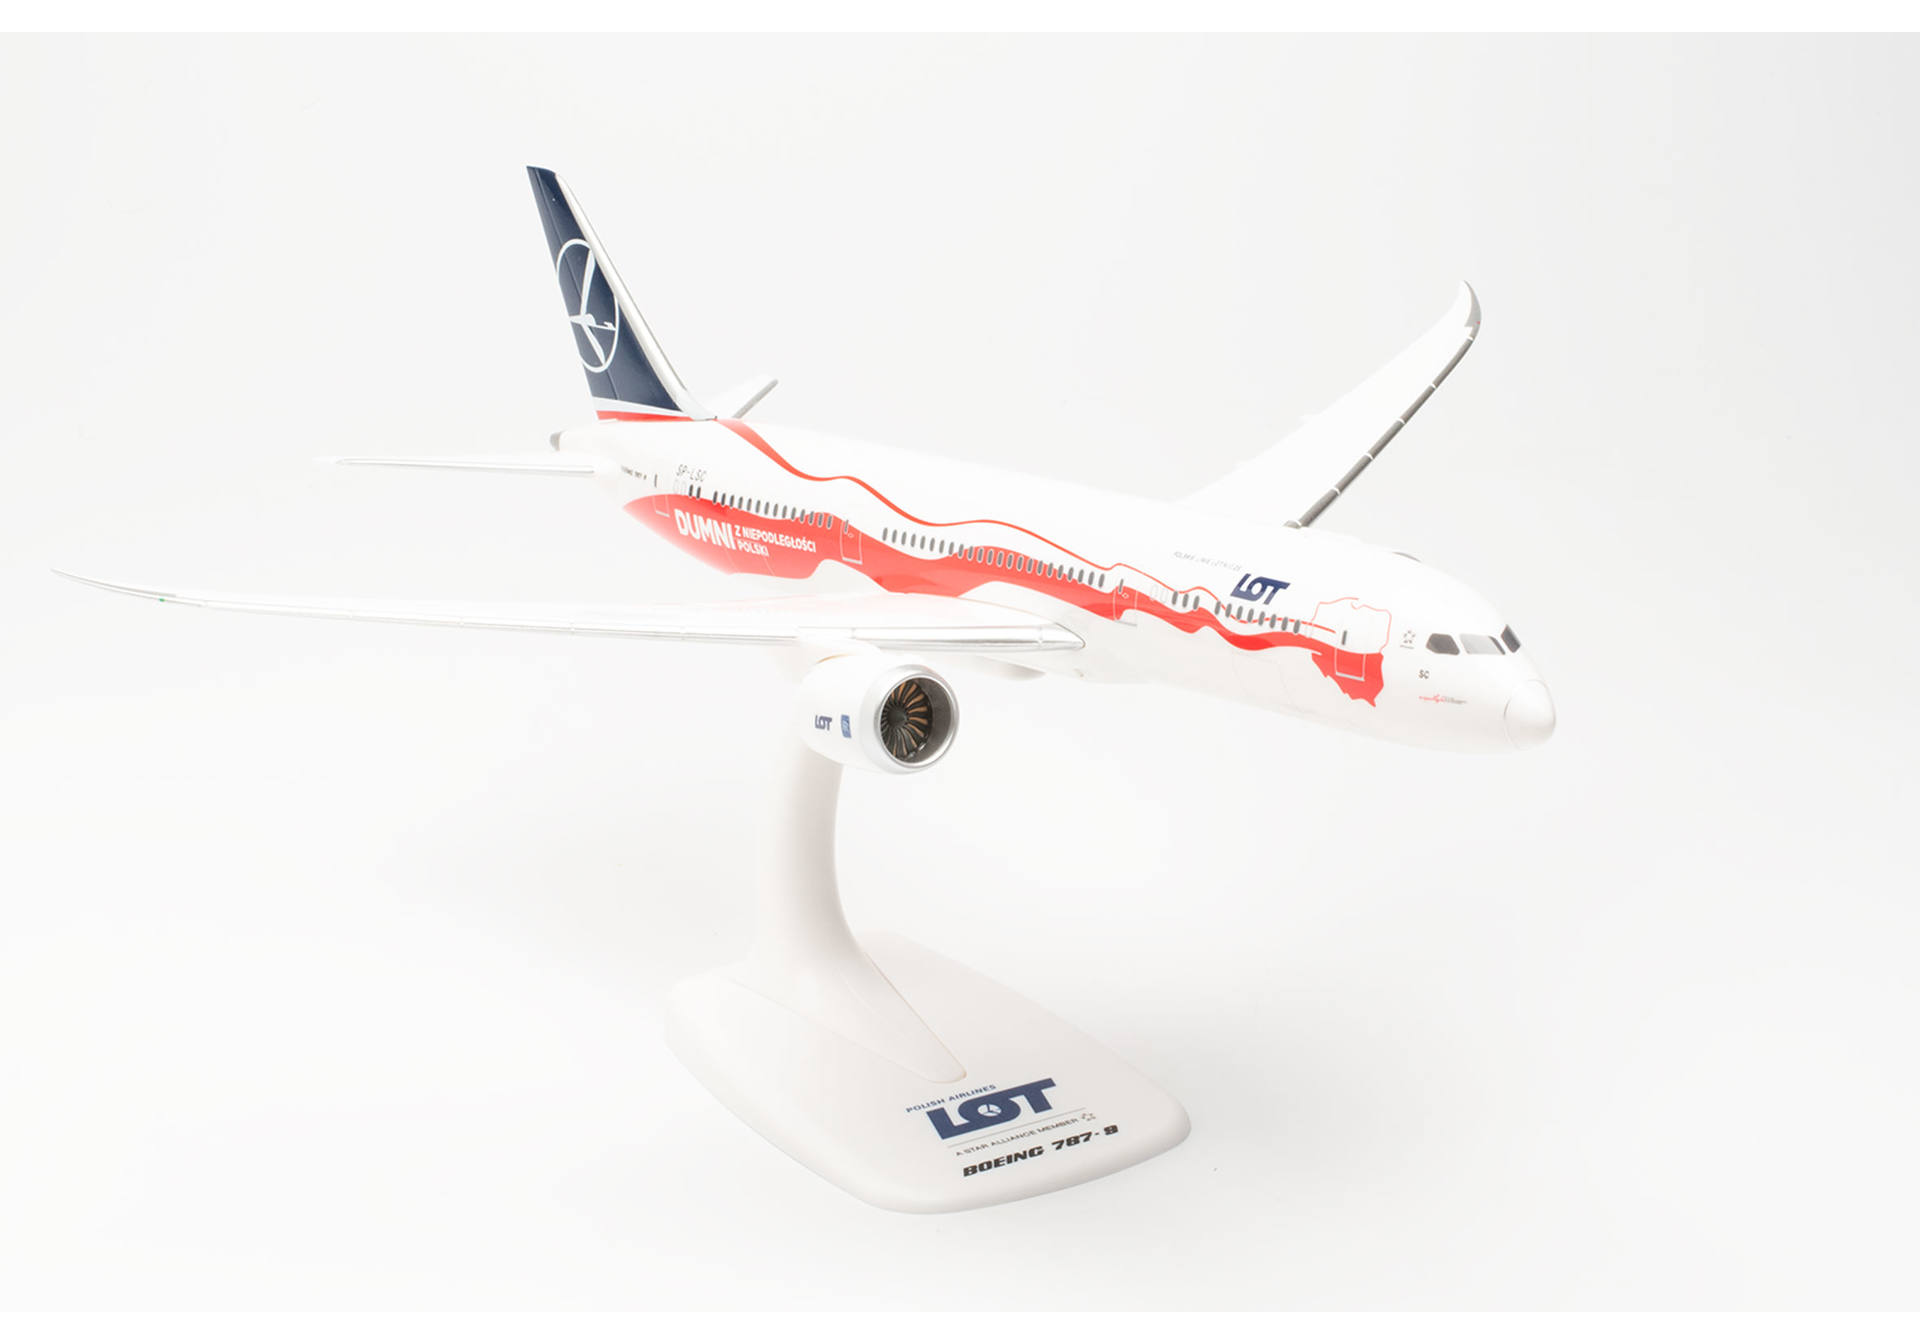 LOT Polish Airlines Boeing 787-9 “Proud of Poland‘s Independence” - SP-LSC